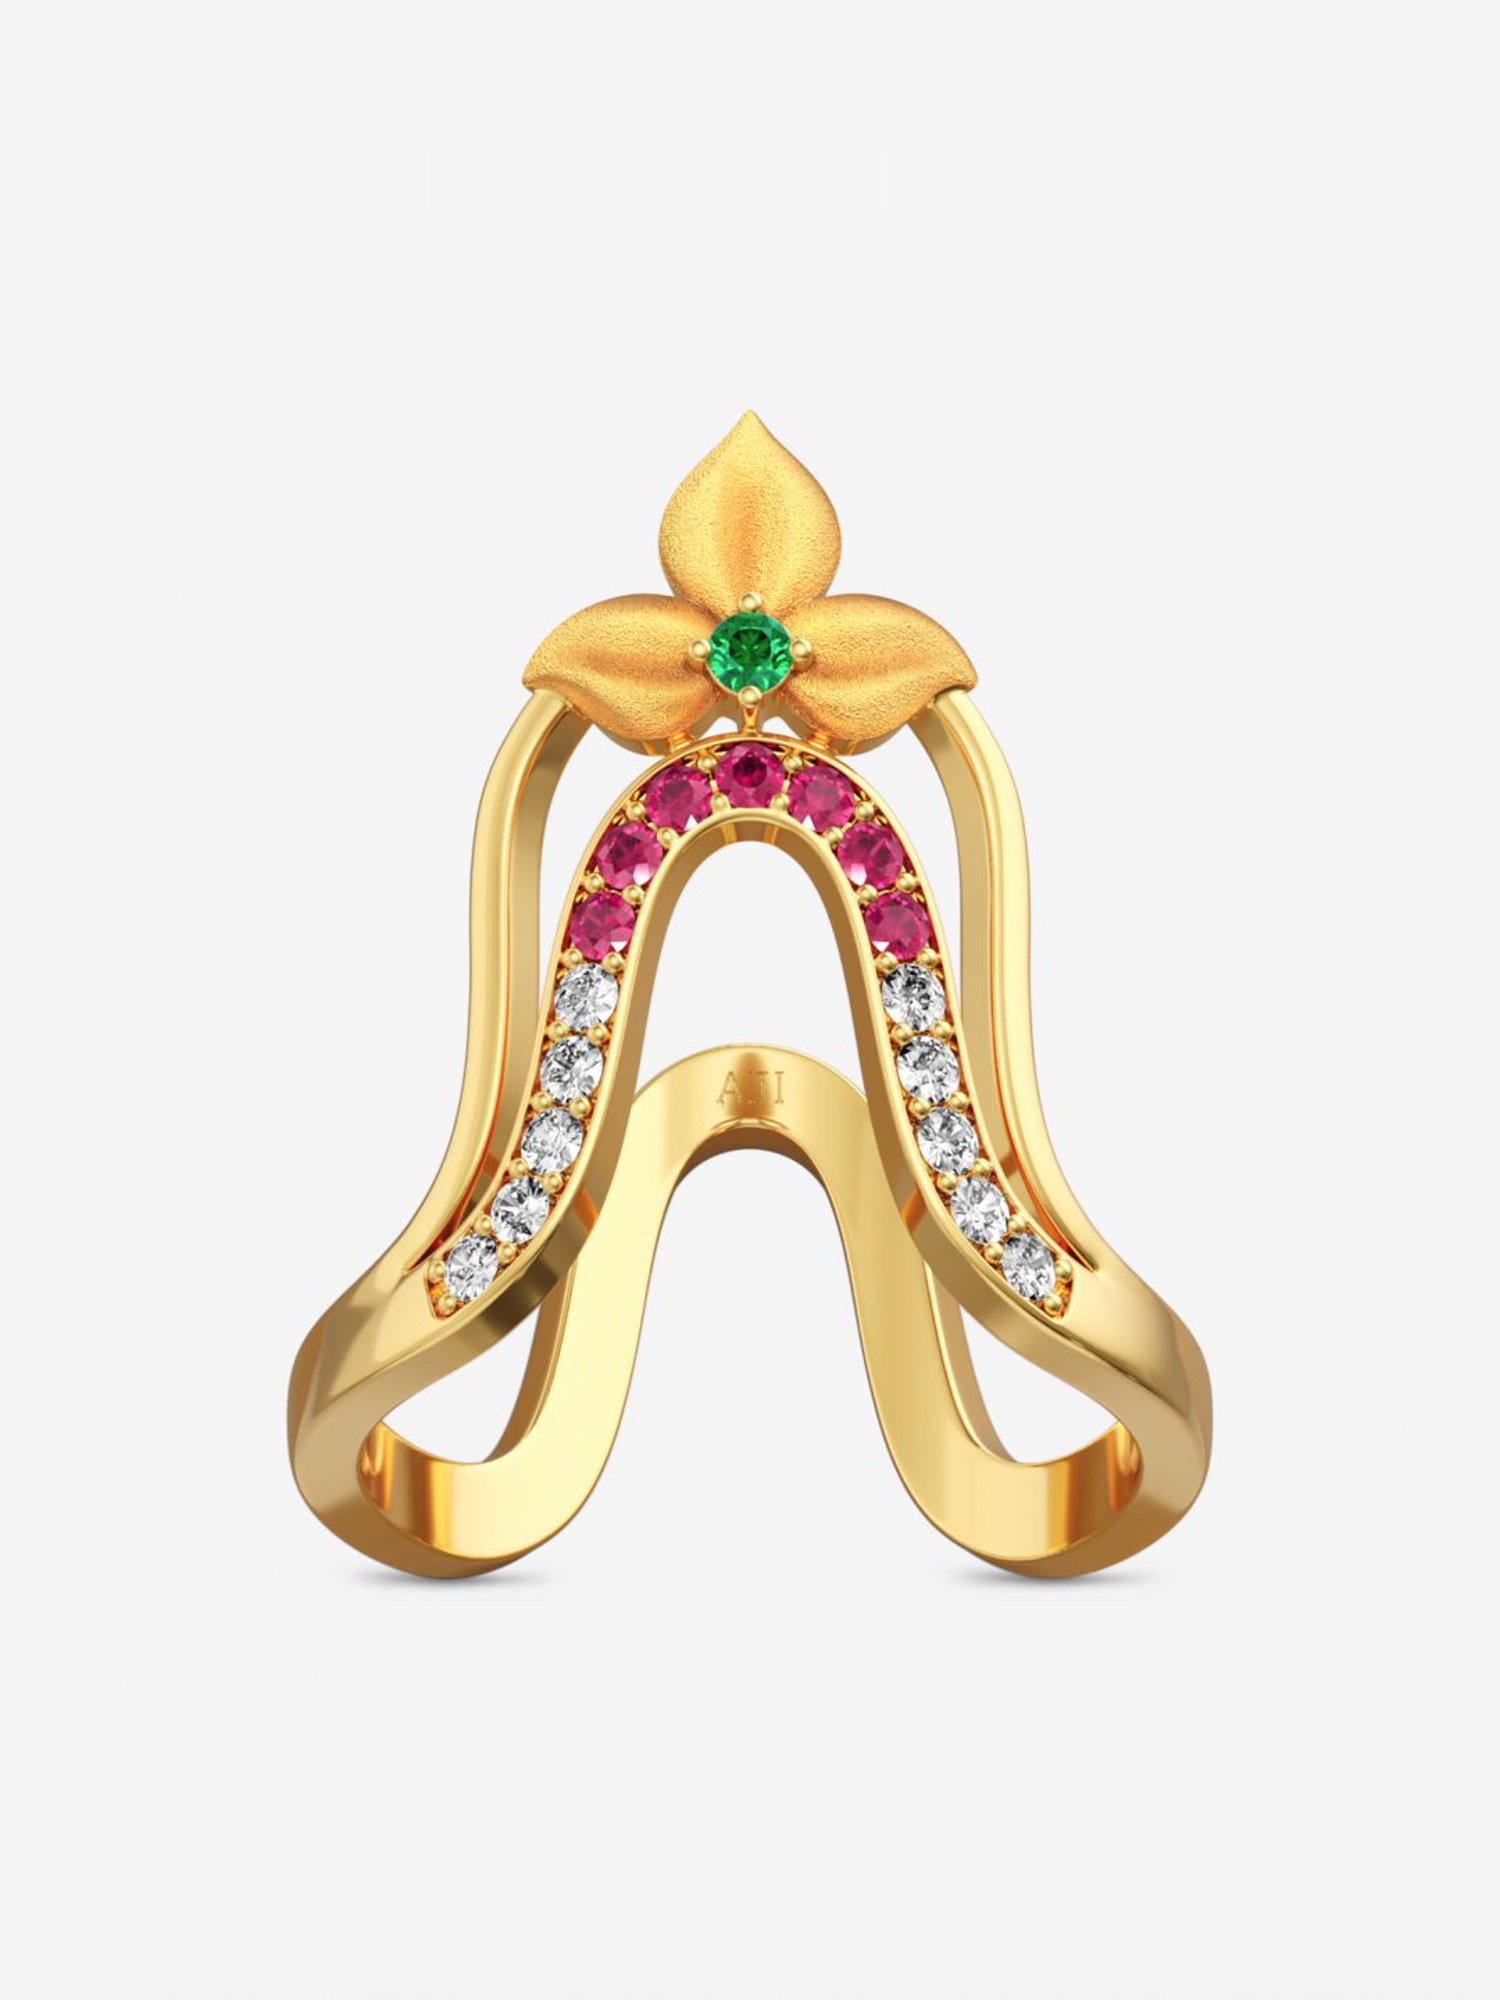 Buy Gold Engagement Rings Designs Online for Women in India